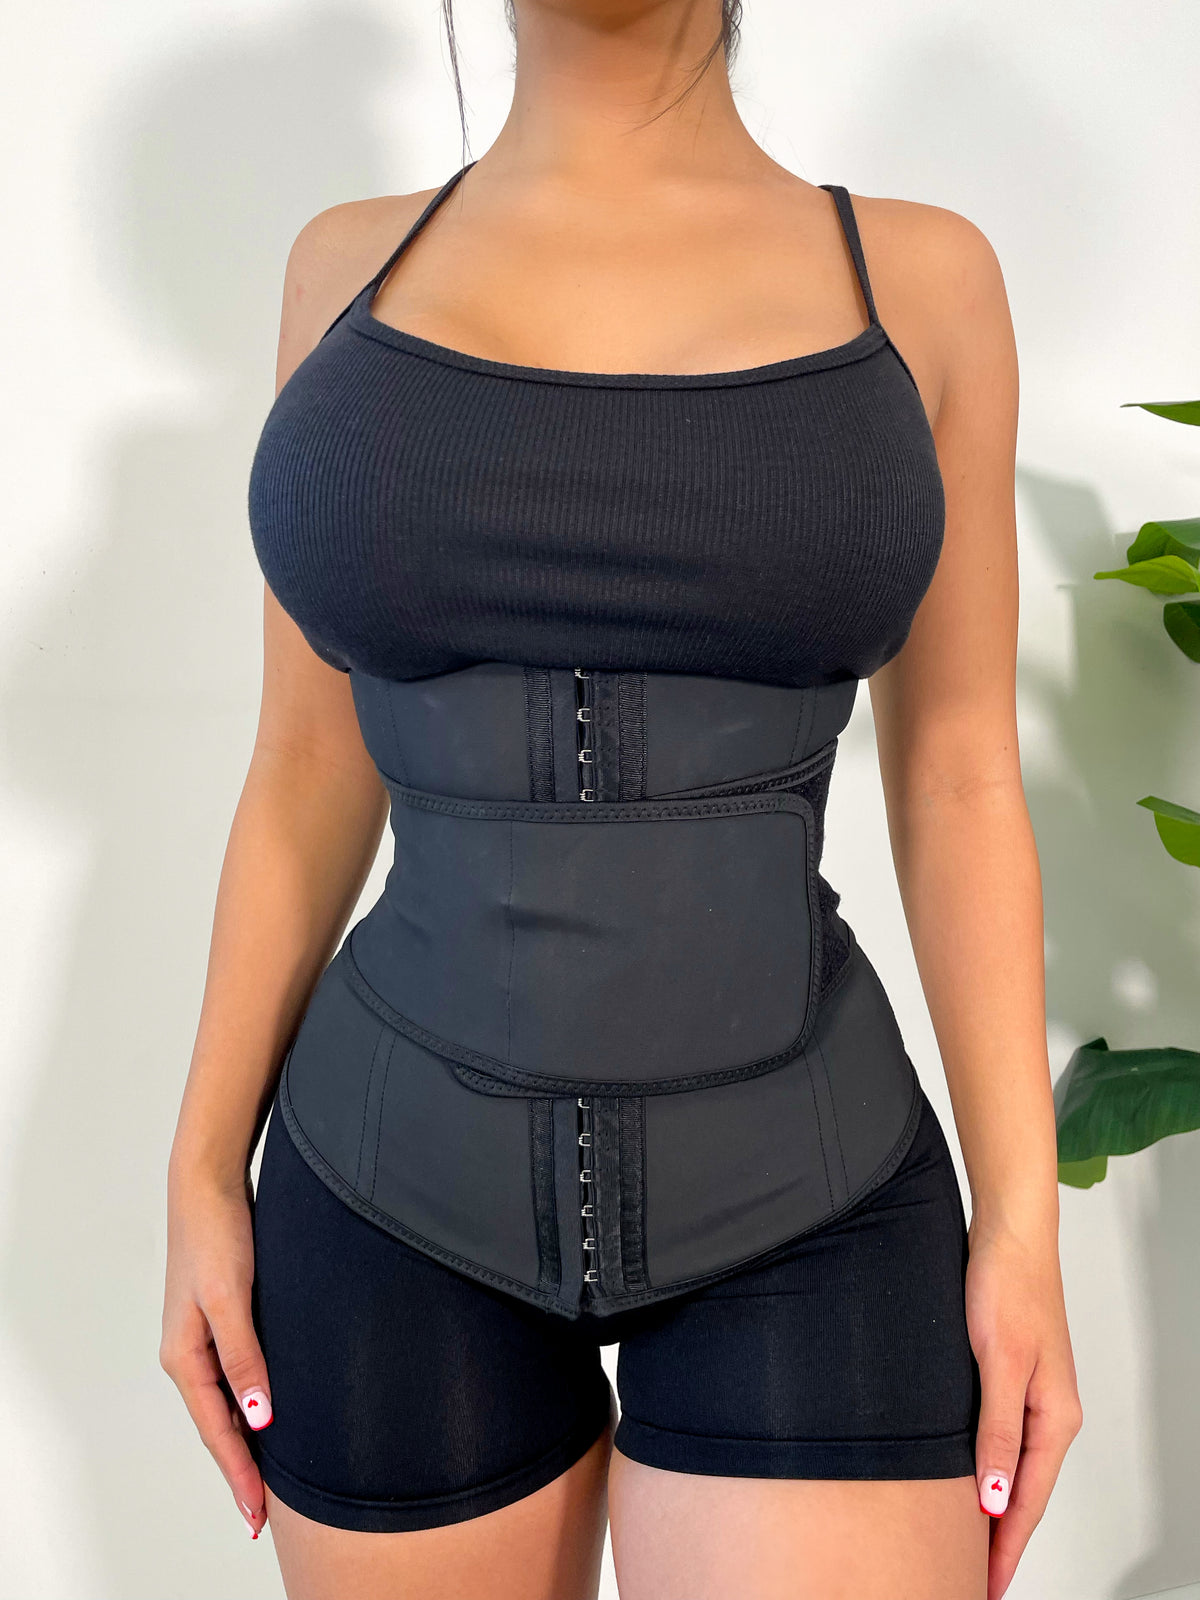 The Best Plus Size Waist Trainers to Buy In 2020